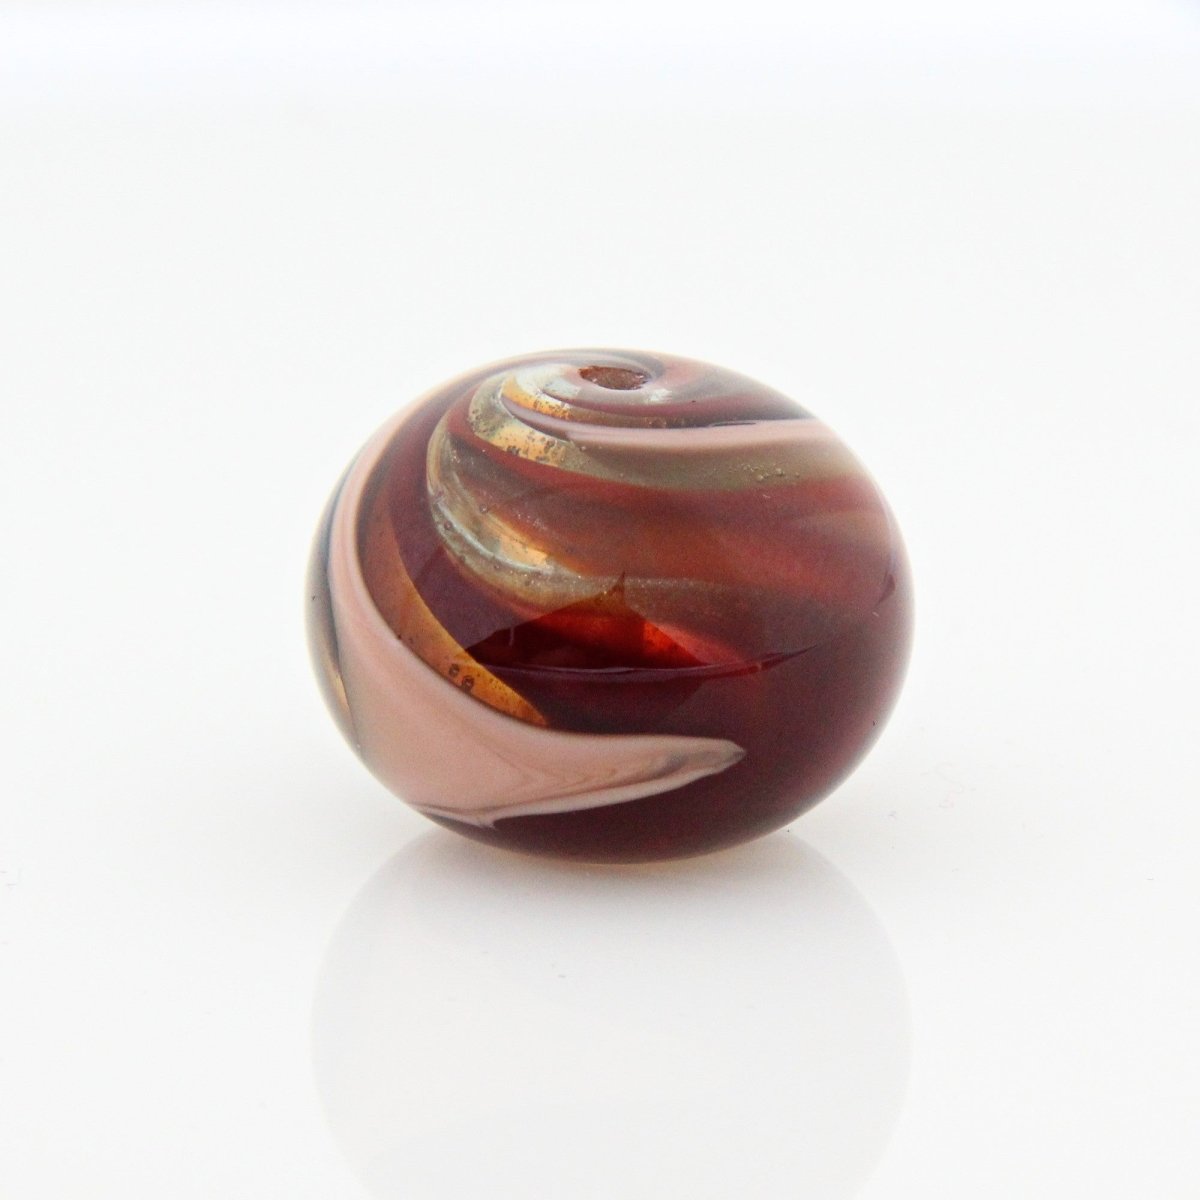 Red and Peach Striped Statement Bead - Handmade Glass Lampwork, Unique Focal Bead for Pendant, Suncatcher, or Home Decorating